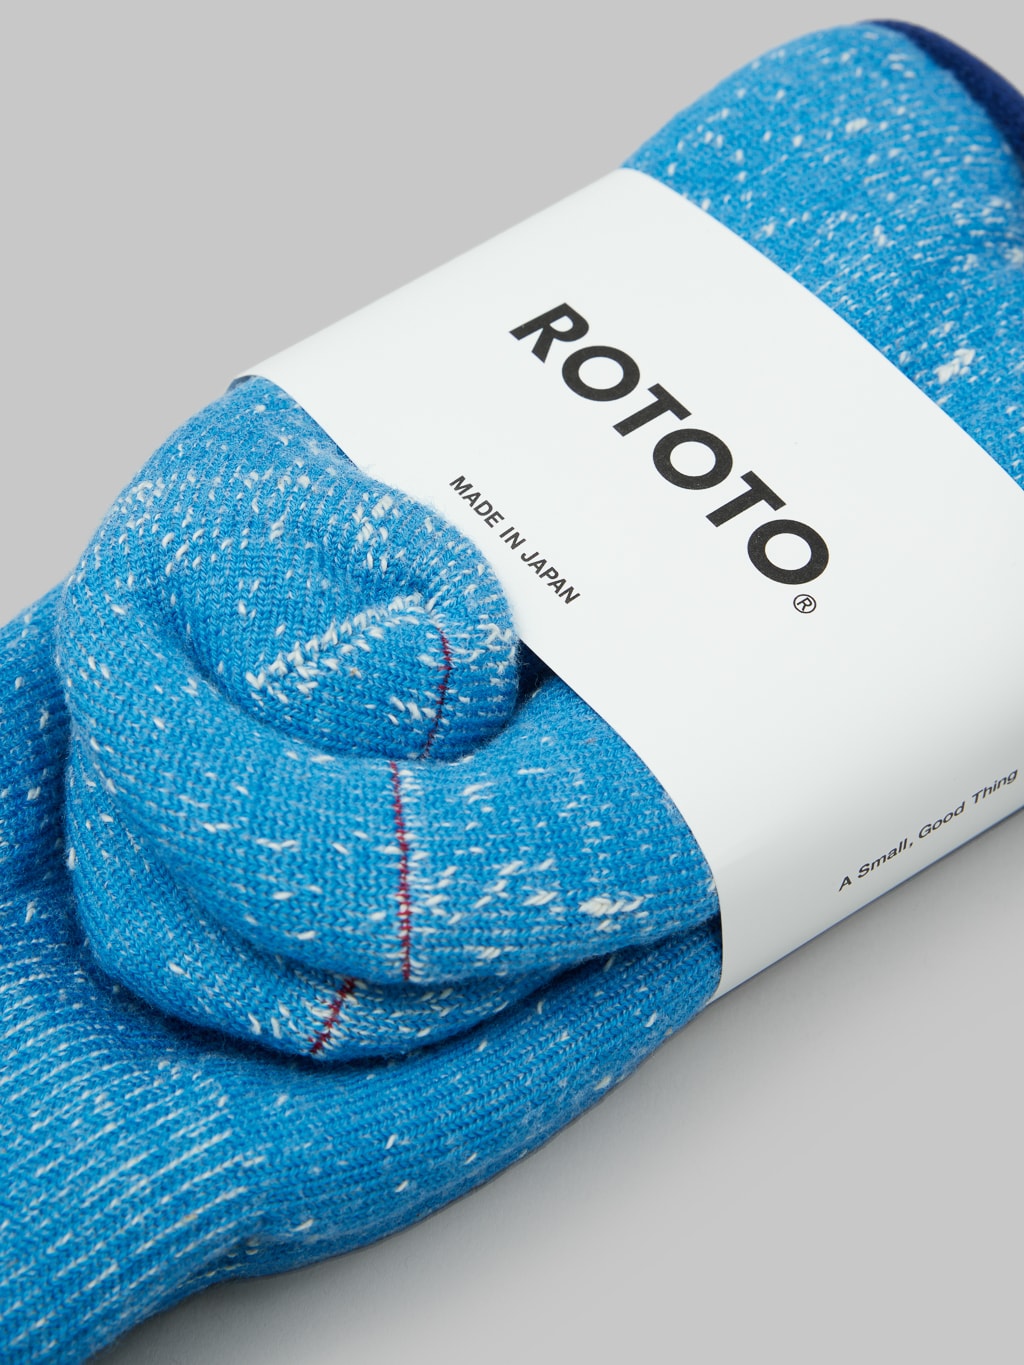 rototo double face crew socks cotton wool blue brand label